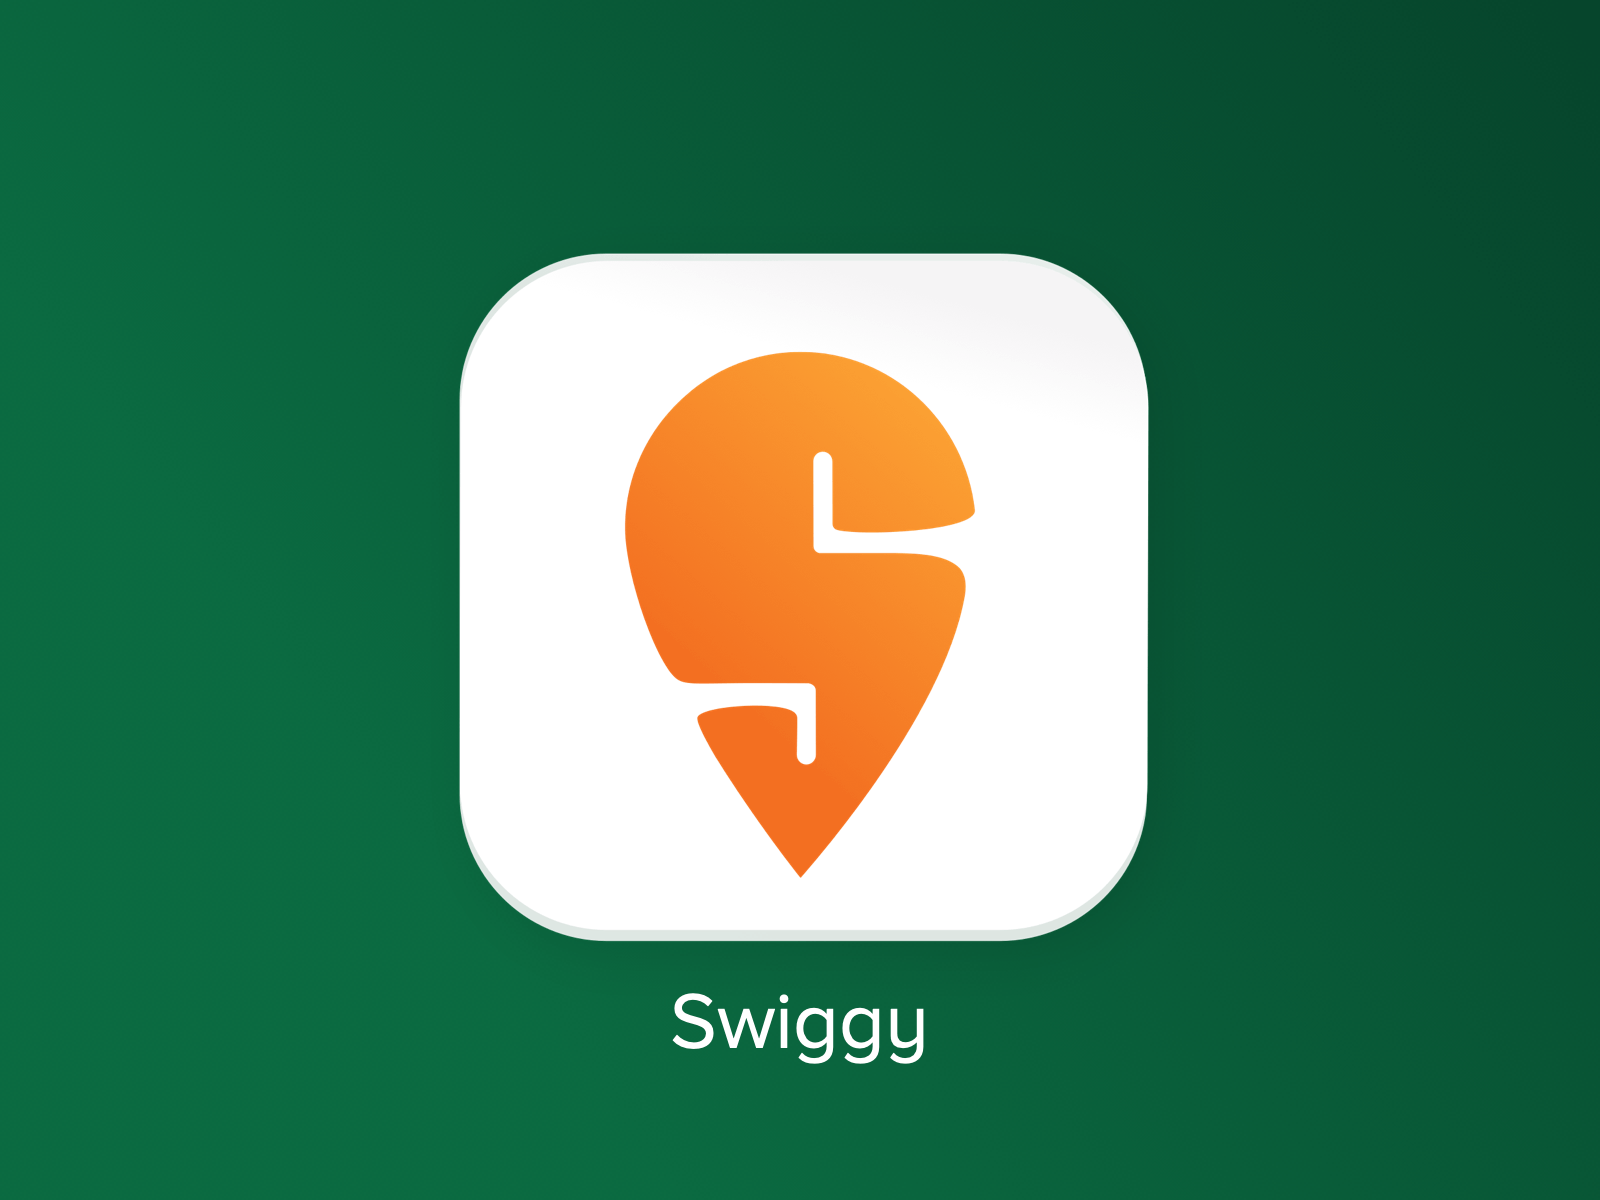 Tweet which led to Boycott Swiggy Trend on Twitter - The News Insight